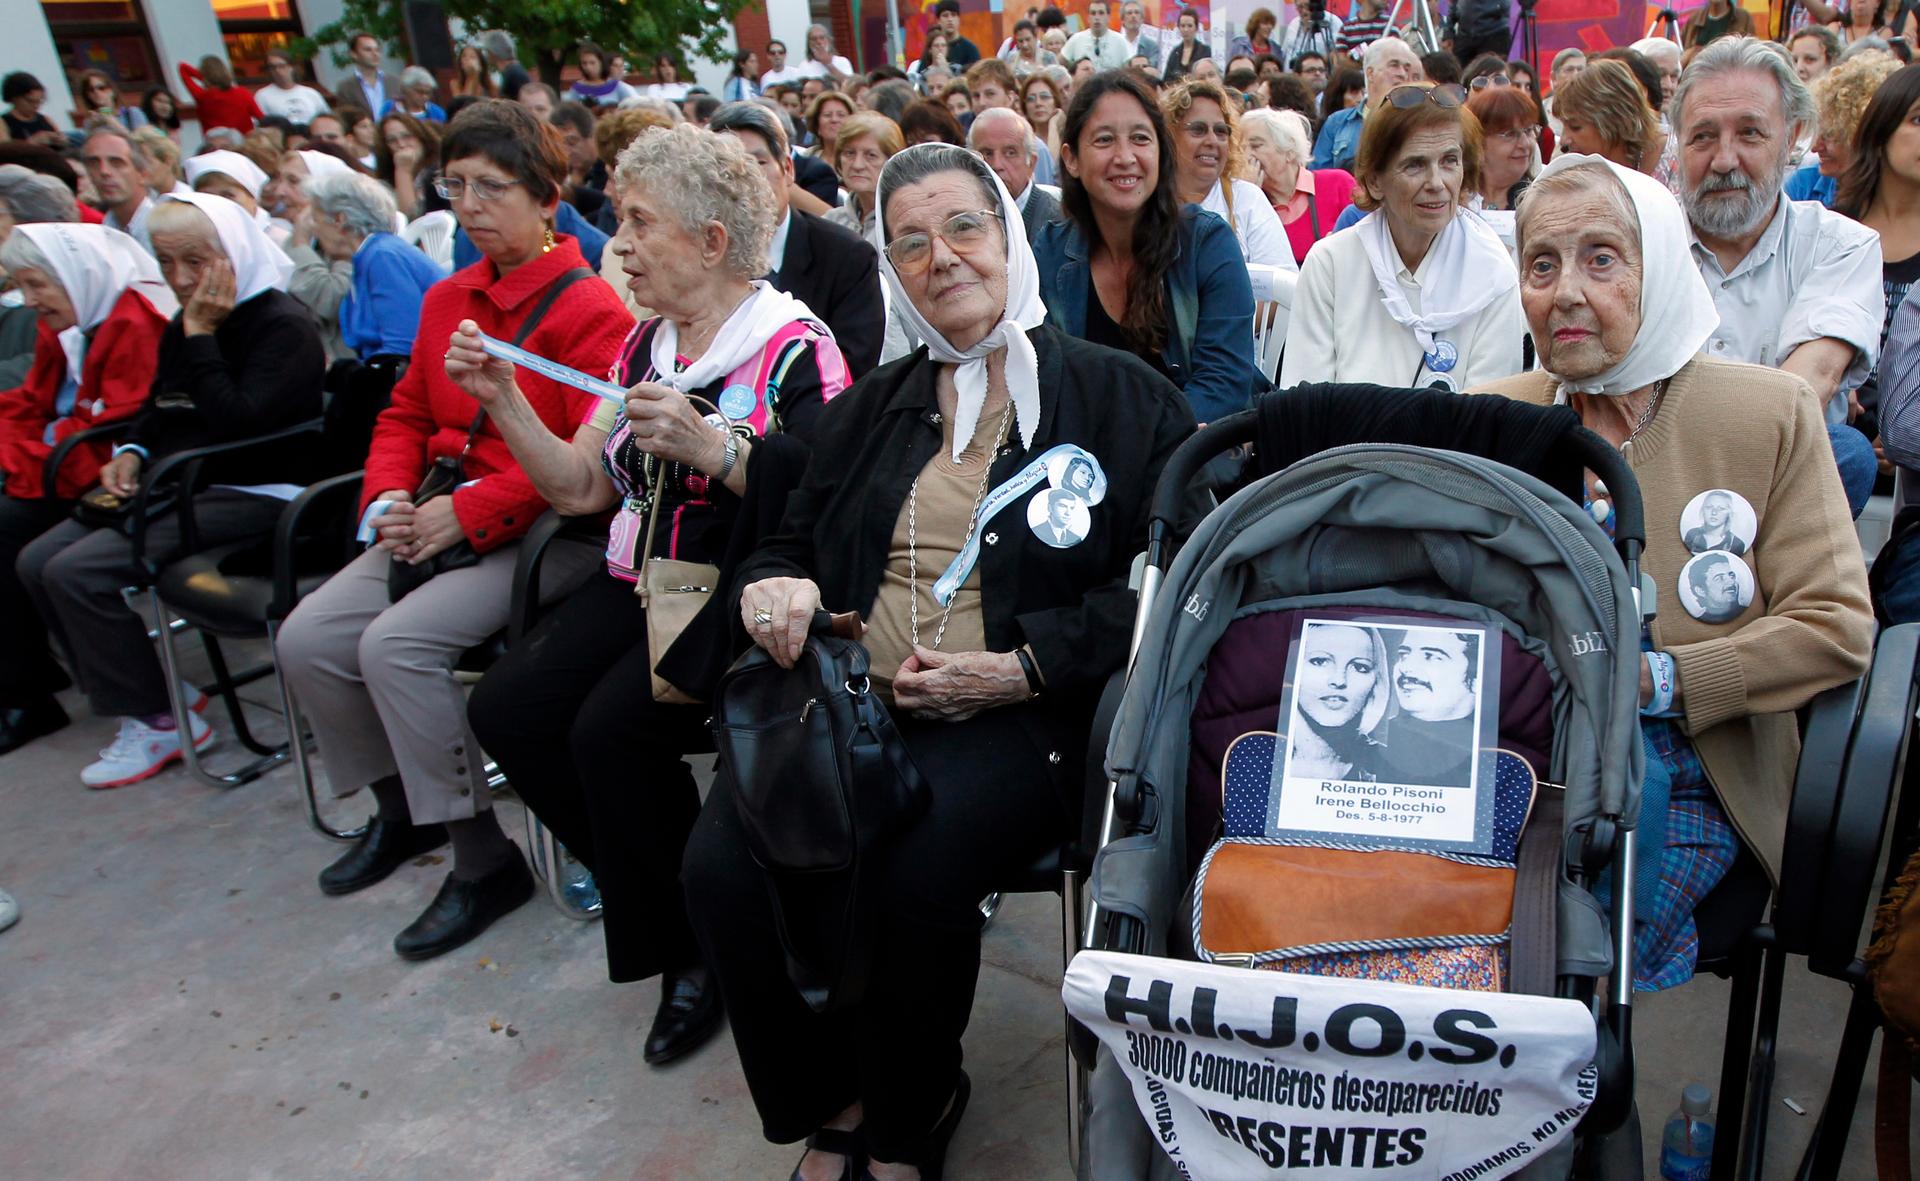 Aurora Zucco de Bellocchio, a member of human rights organization Madres de Plaza de Mayo (Mothers of Plaza de Mayo), sits behind a pram with a picture of her daughter Irene Bellocchio and her partner Rolando Pisoni, who both disappeared in 1977, during t